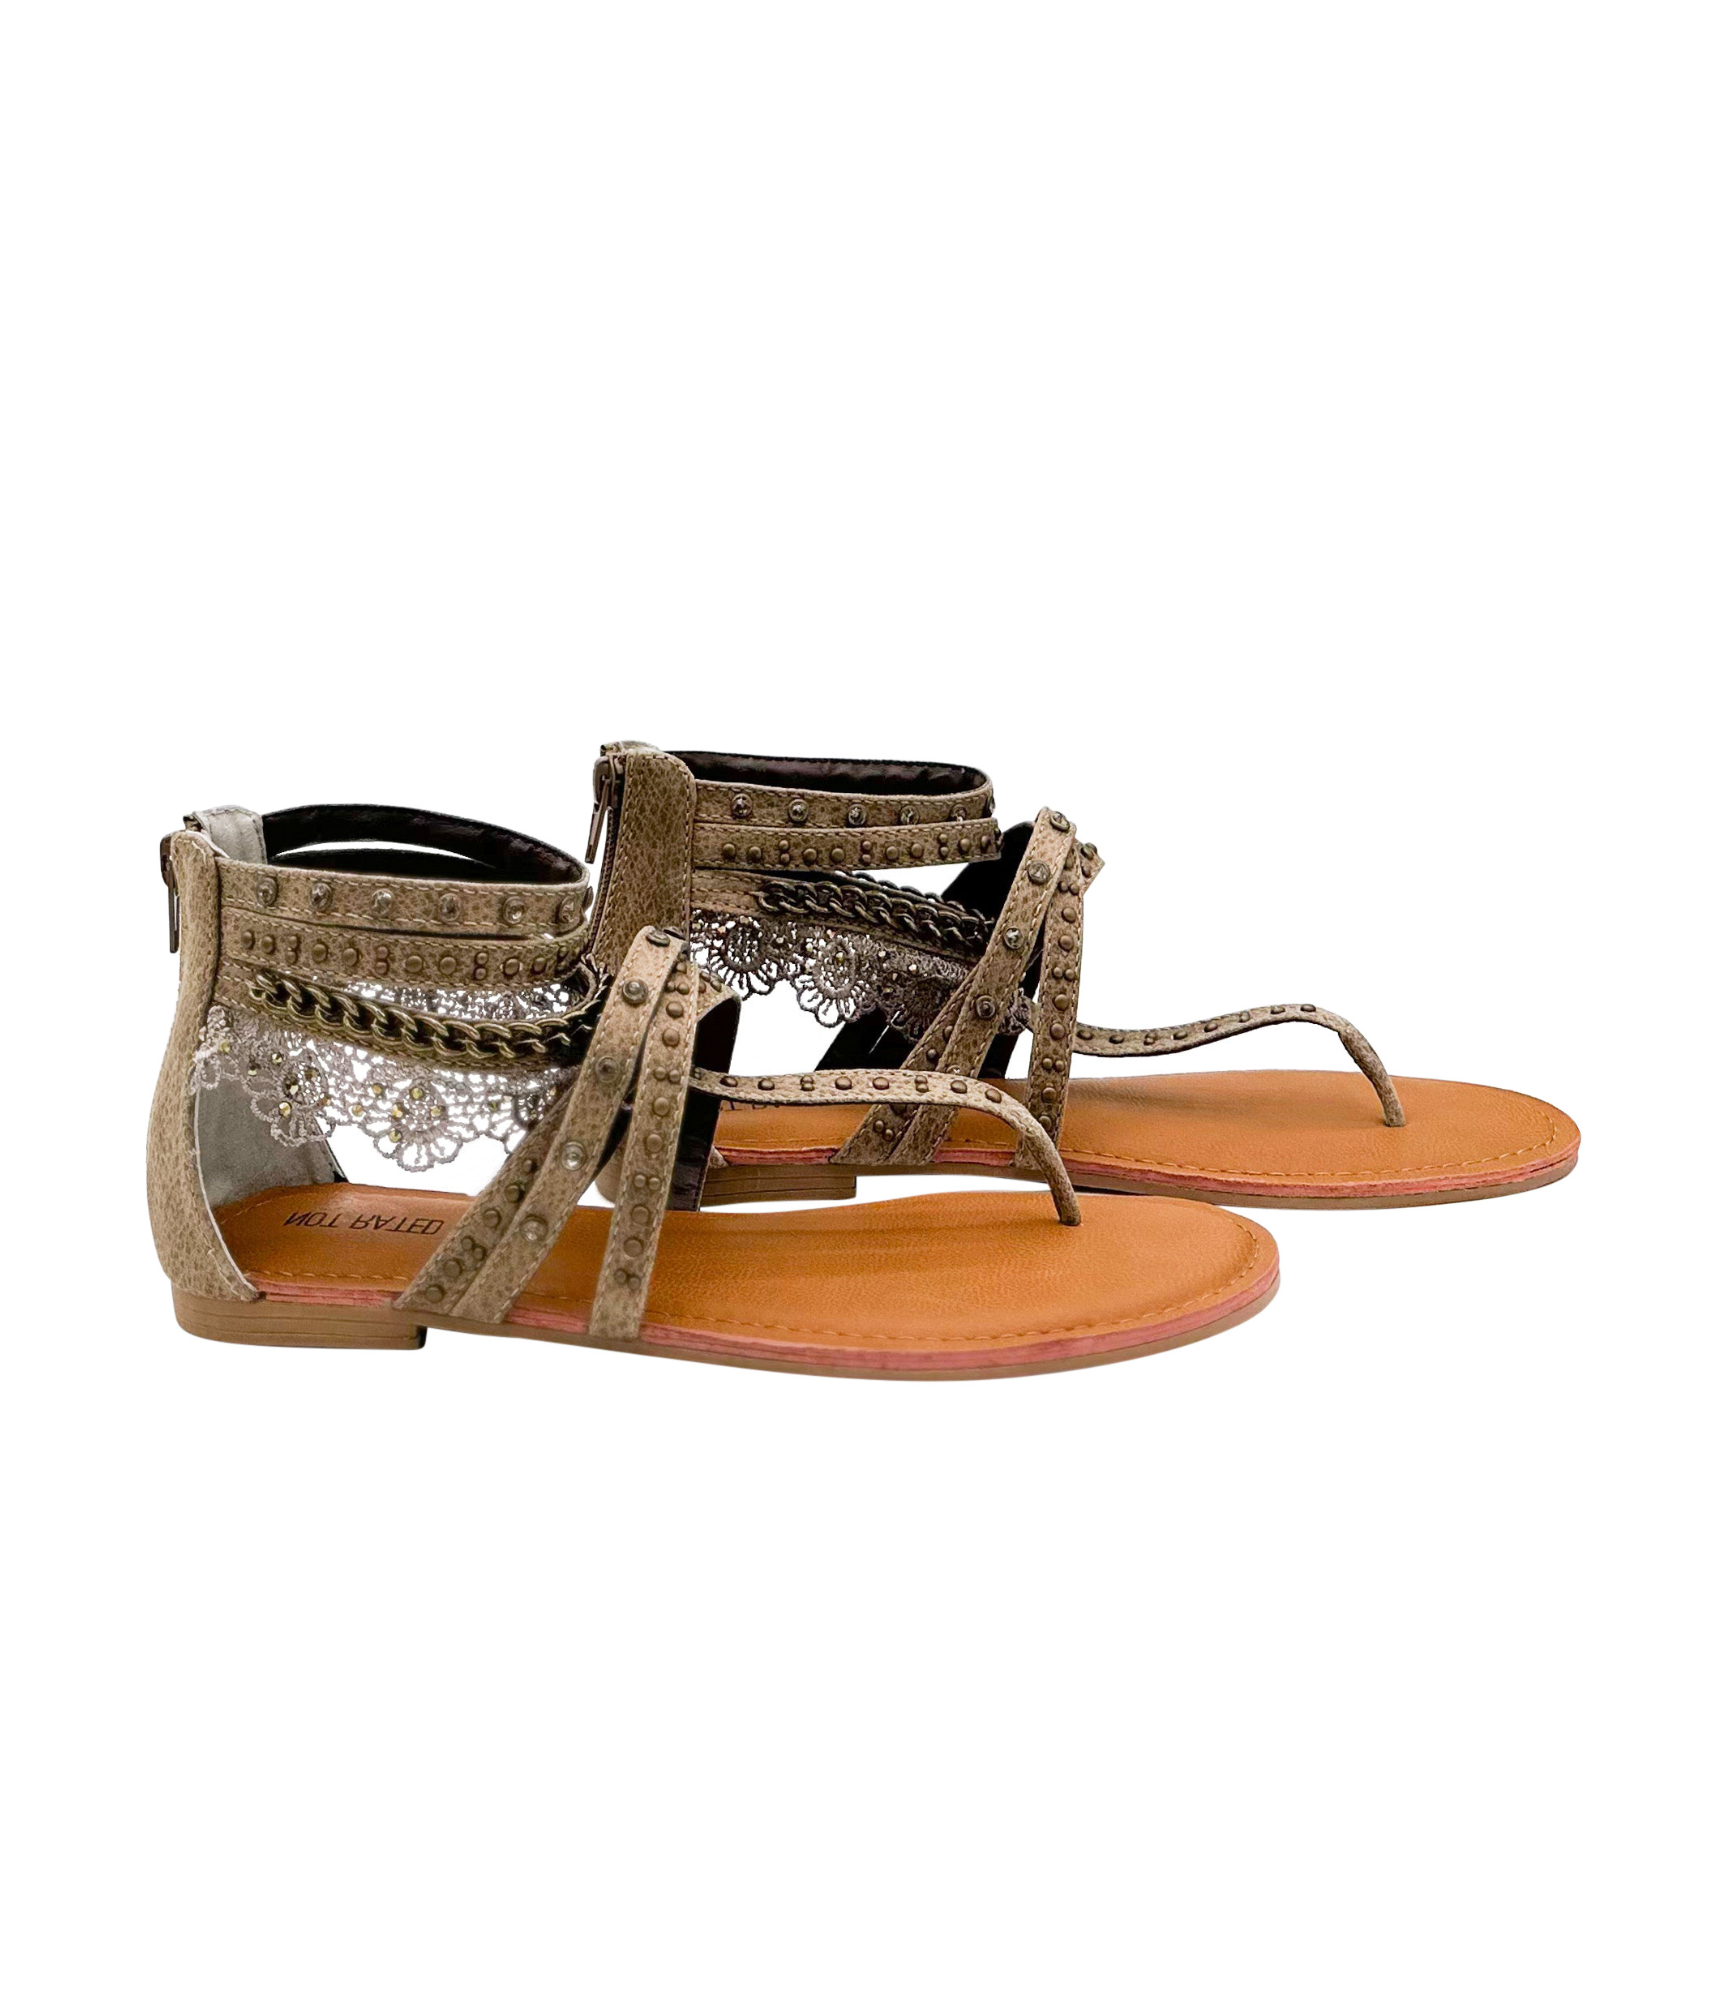 Willow Sandal in Taupe